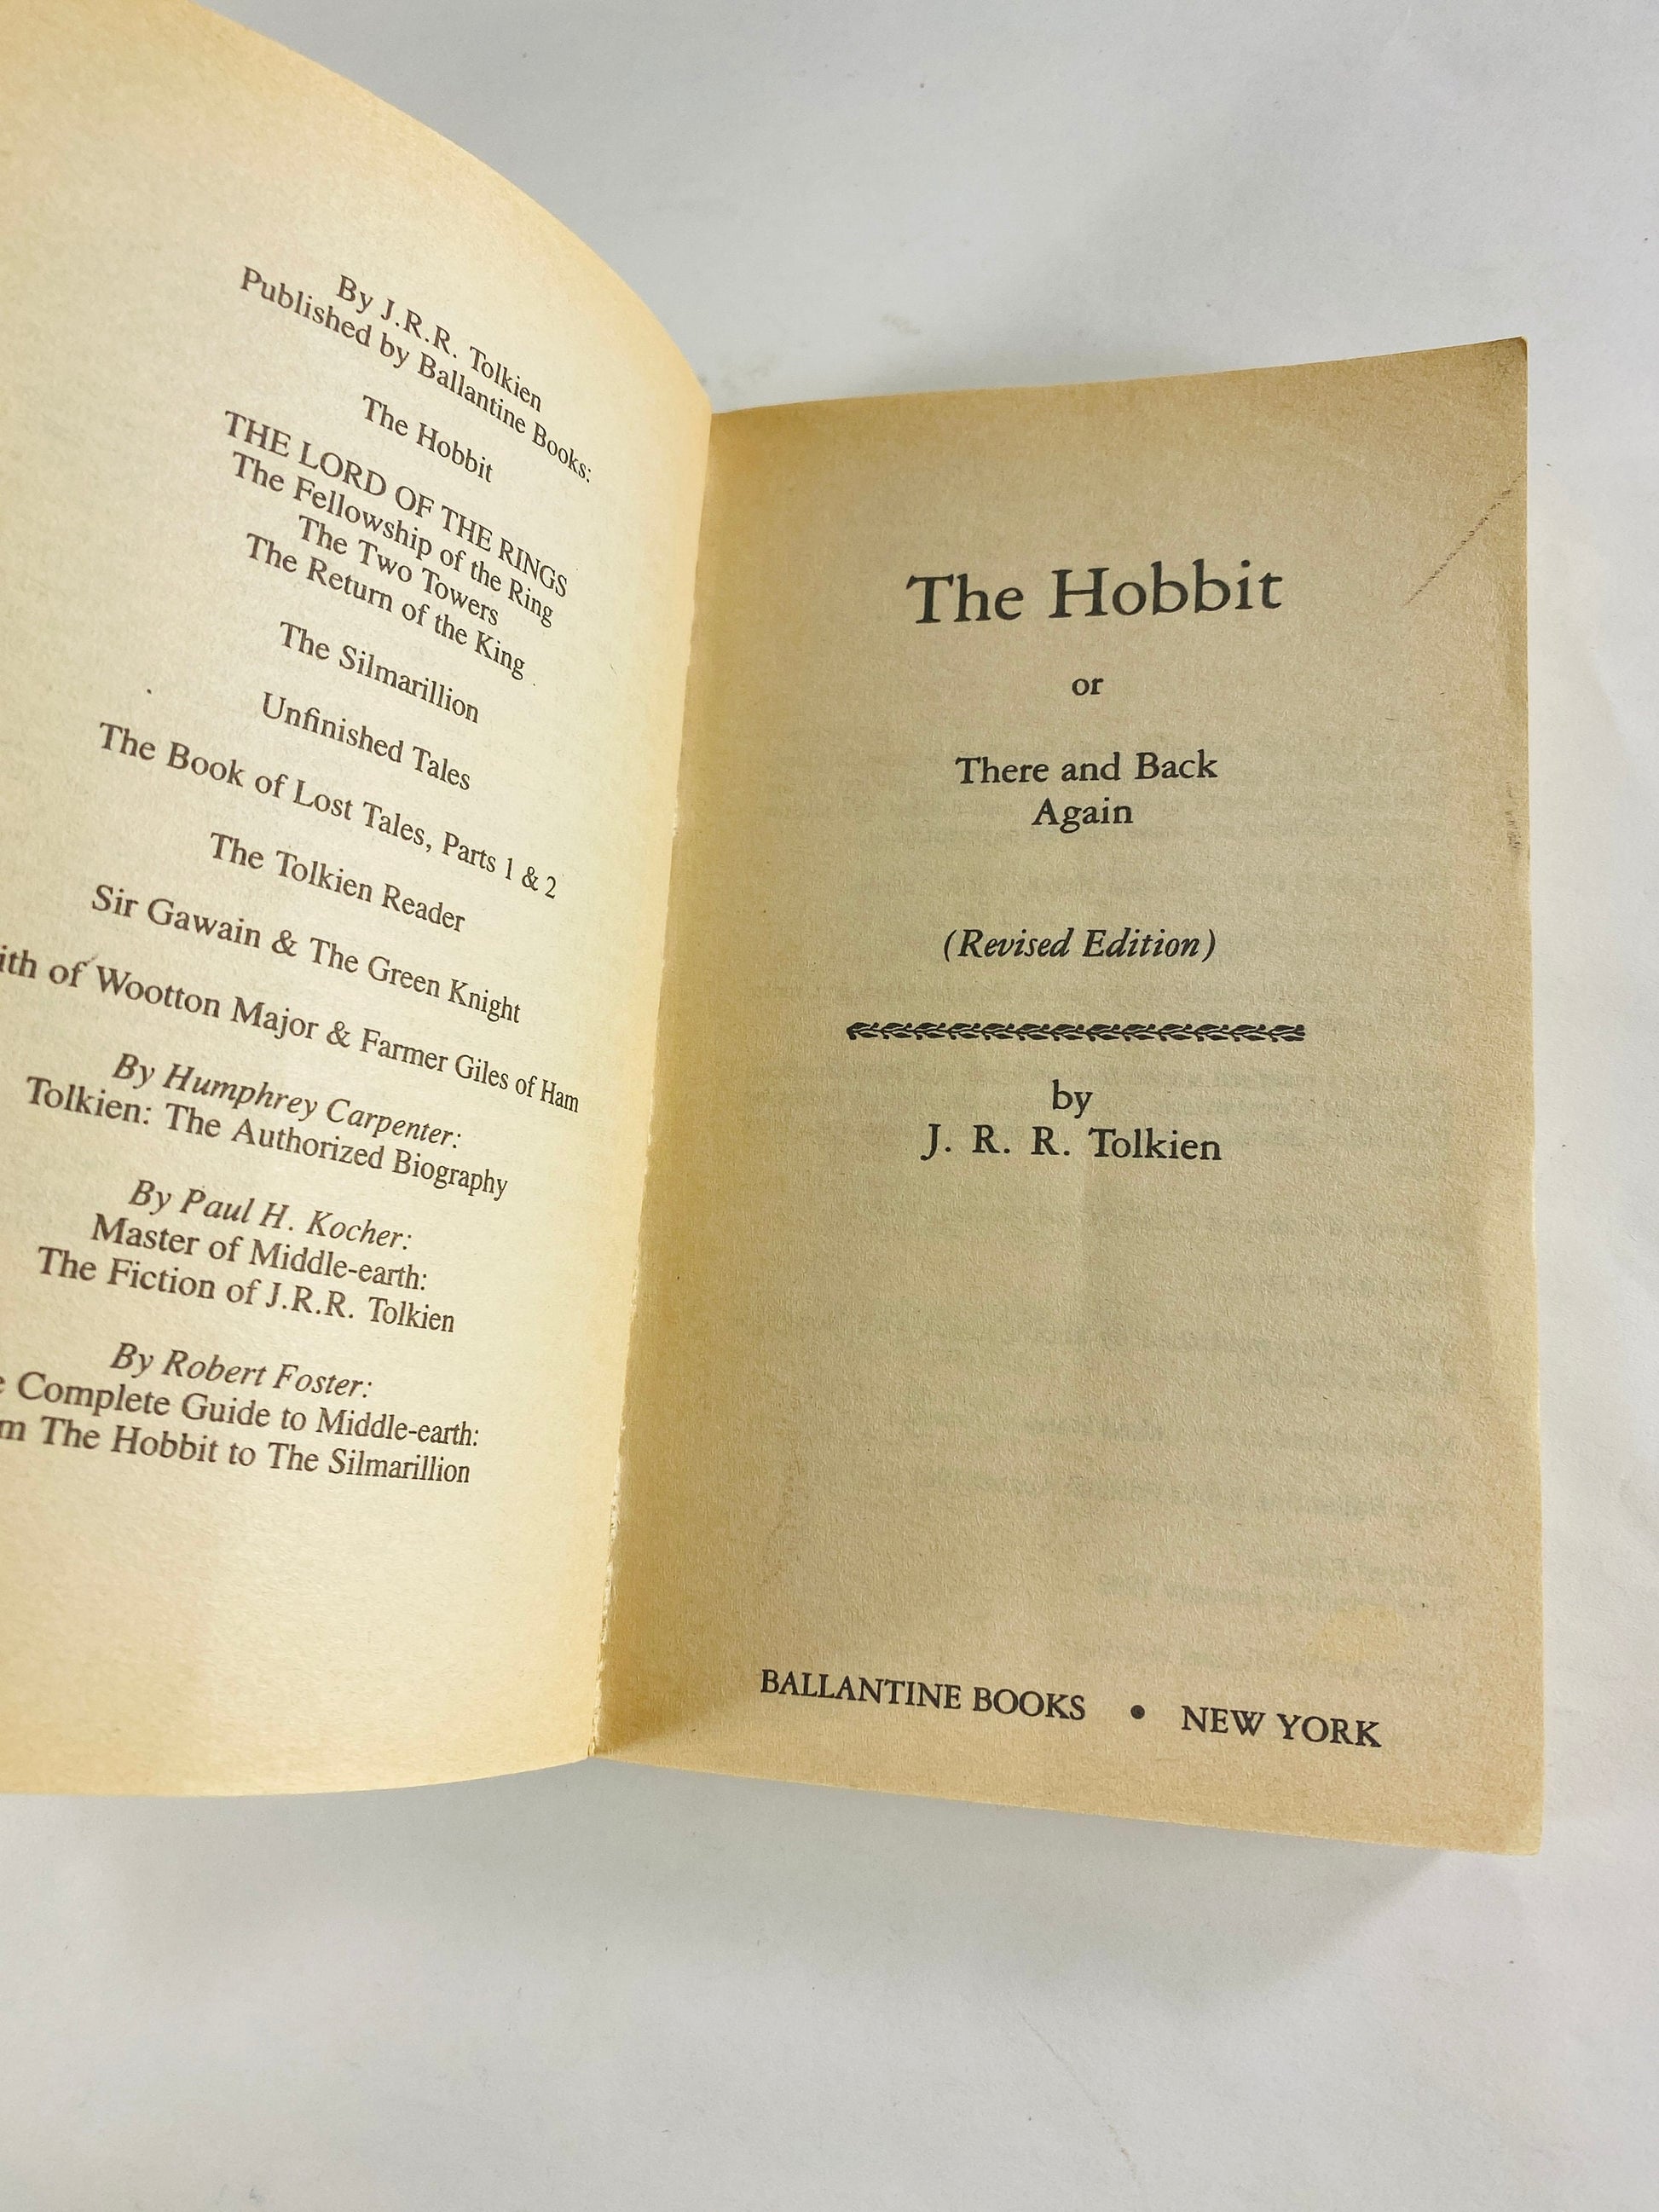 JRR Tolkien The Hobbut vintage Lord of the Rings paperback book circa 1982. Former library book LOTR